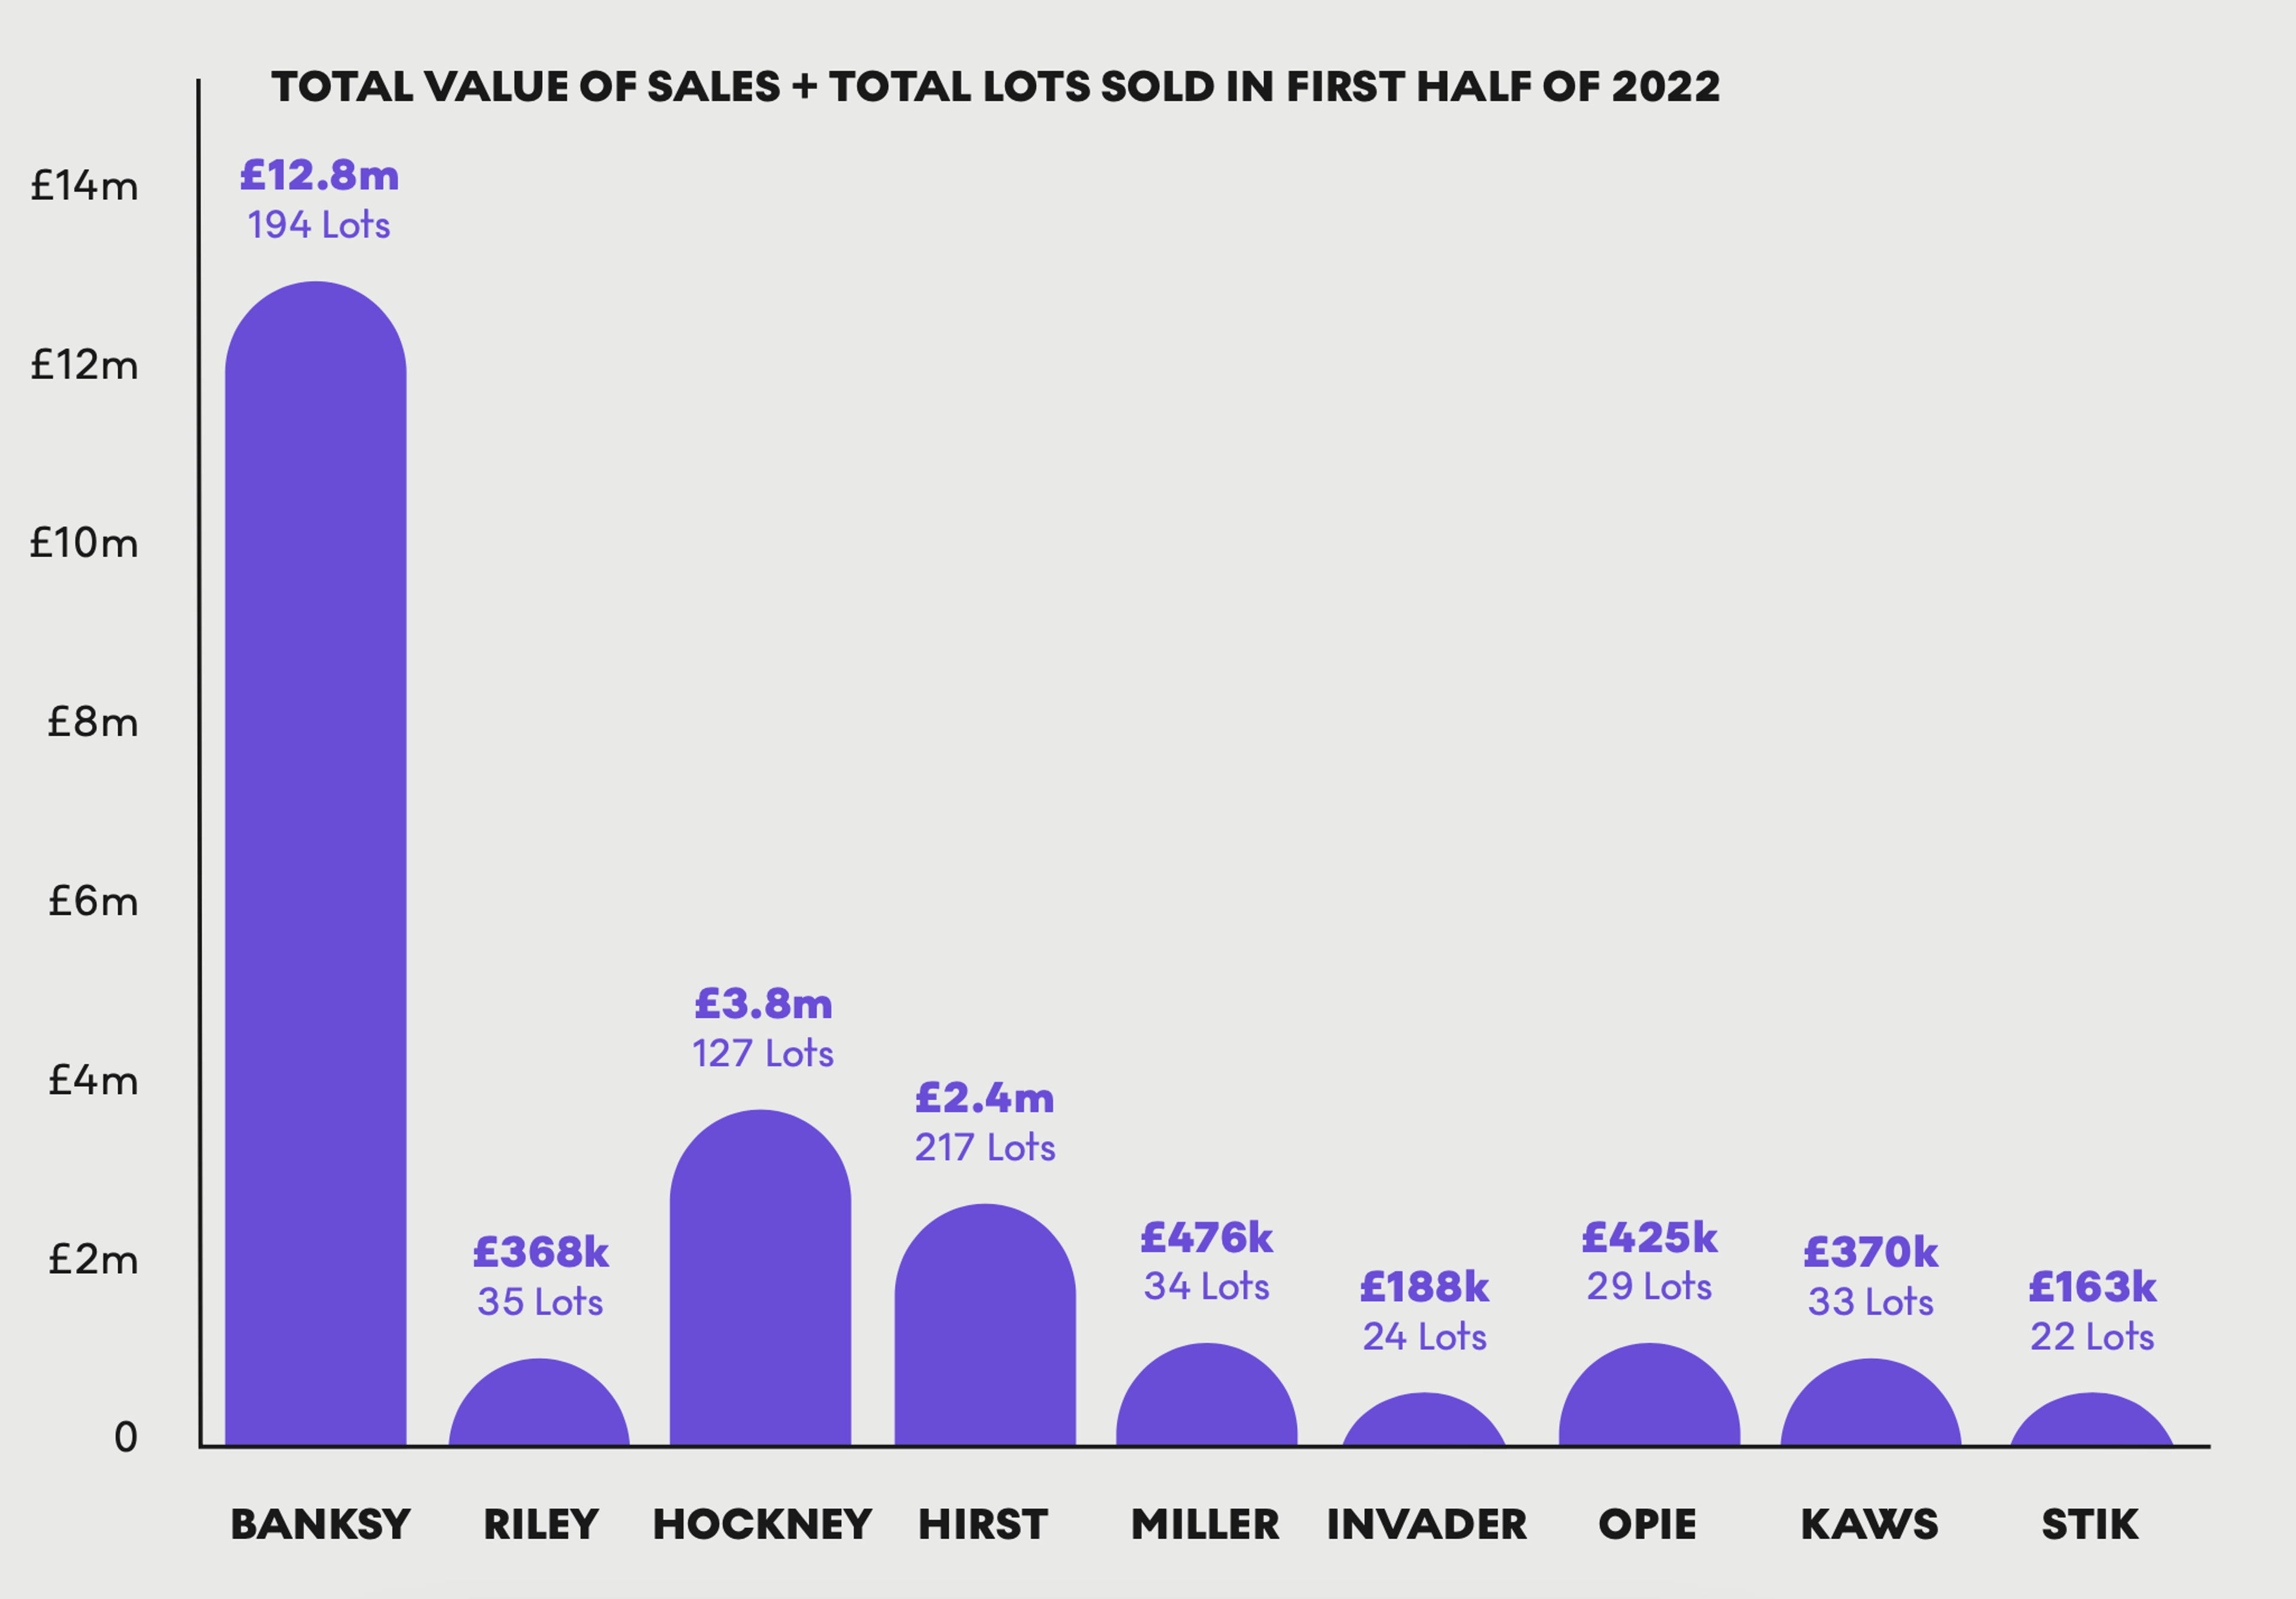 Total Value of Sales + Total Lots Sold in First Half of 2022